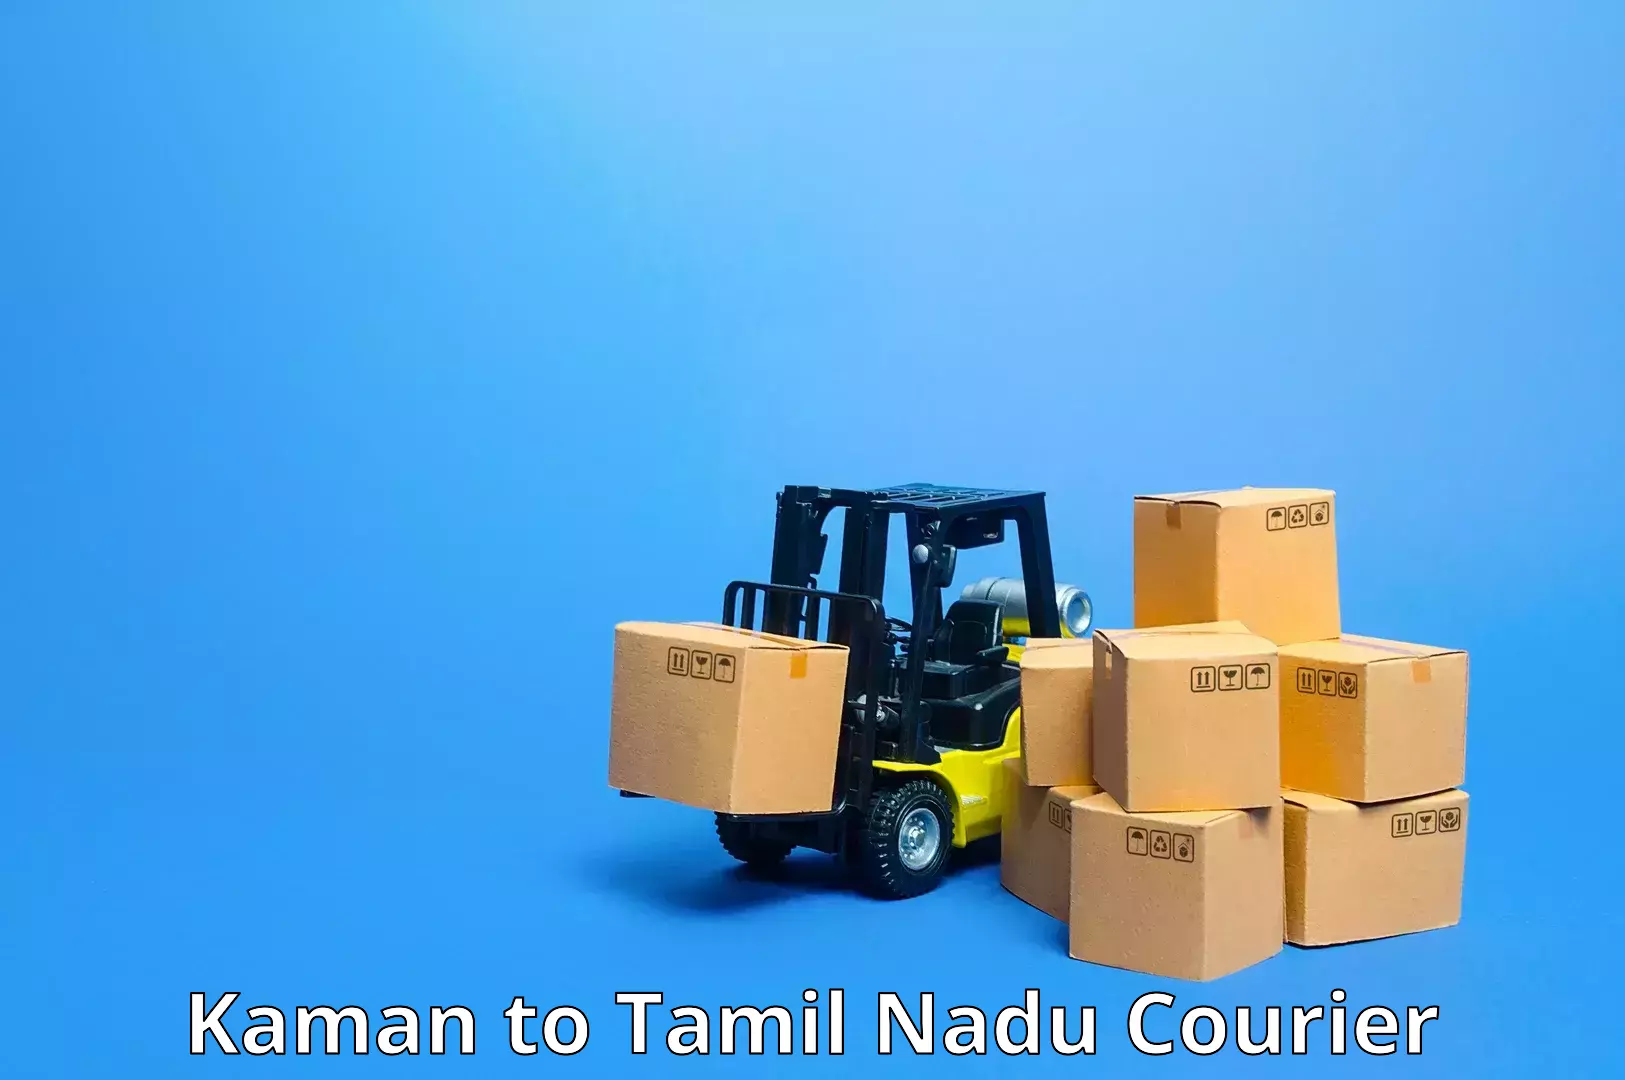 Automated shipping processes in Kaman to Tamil Nadu